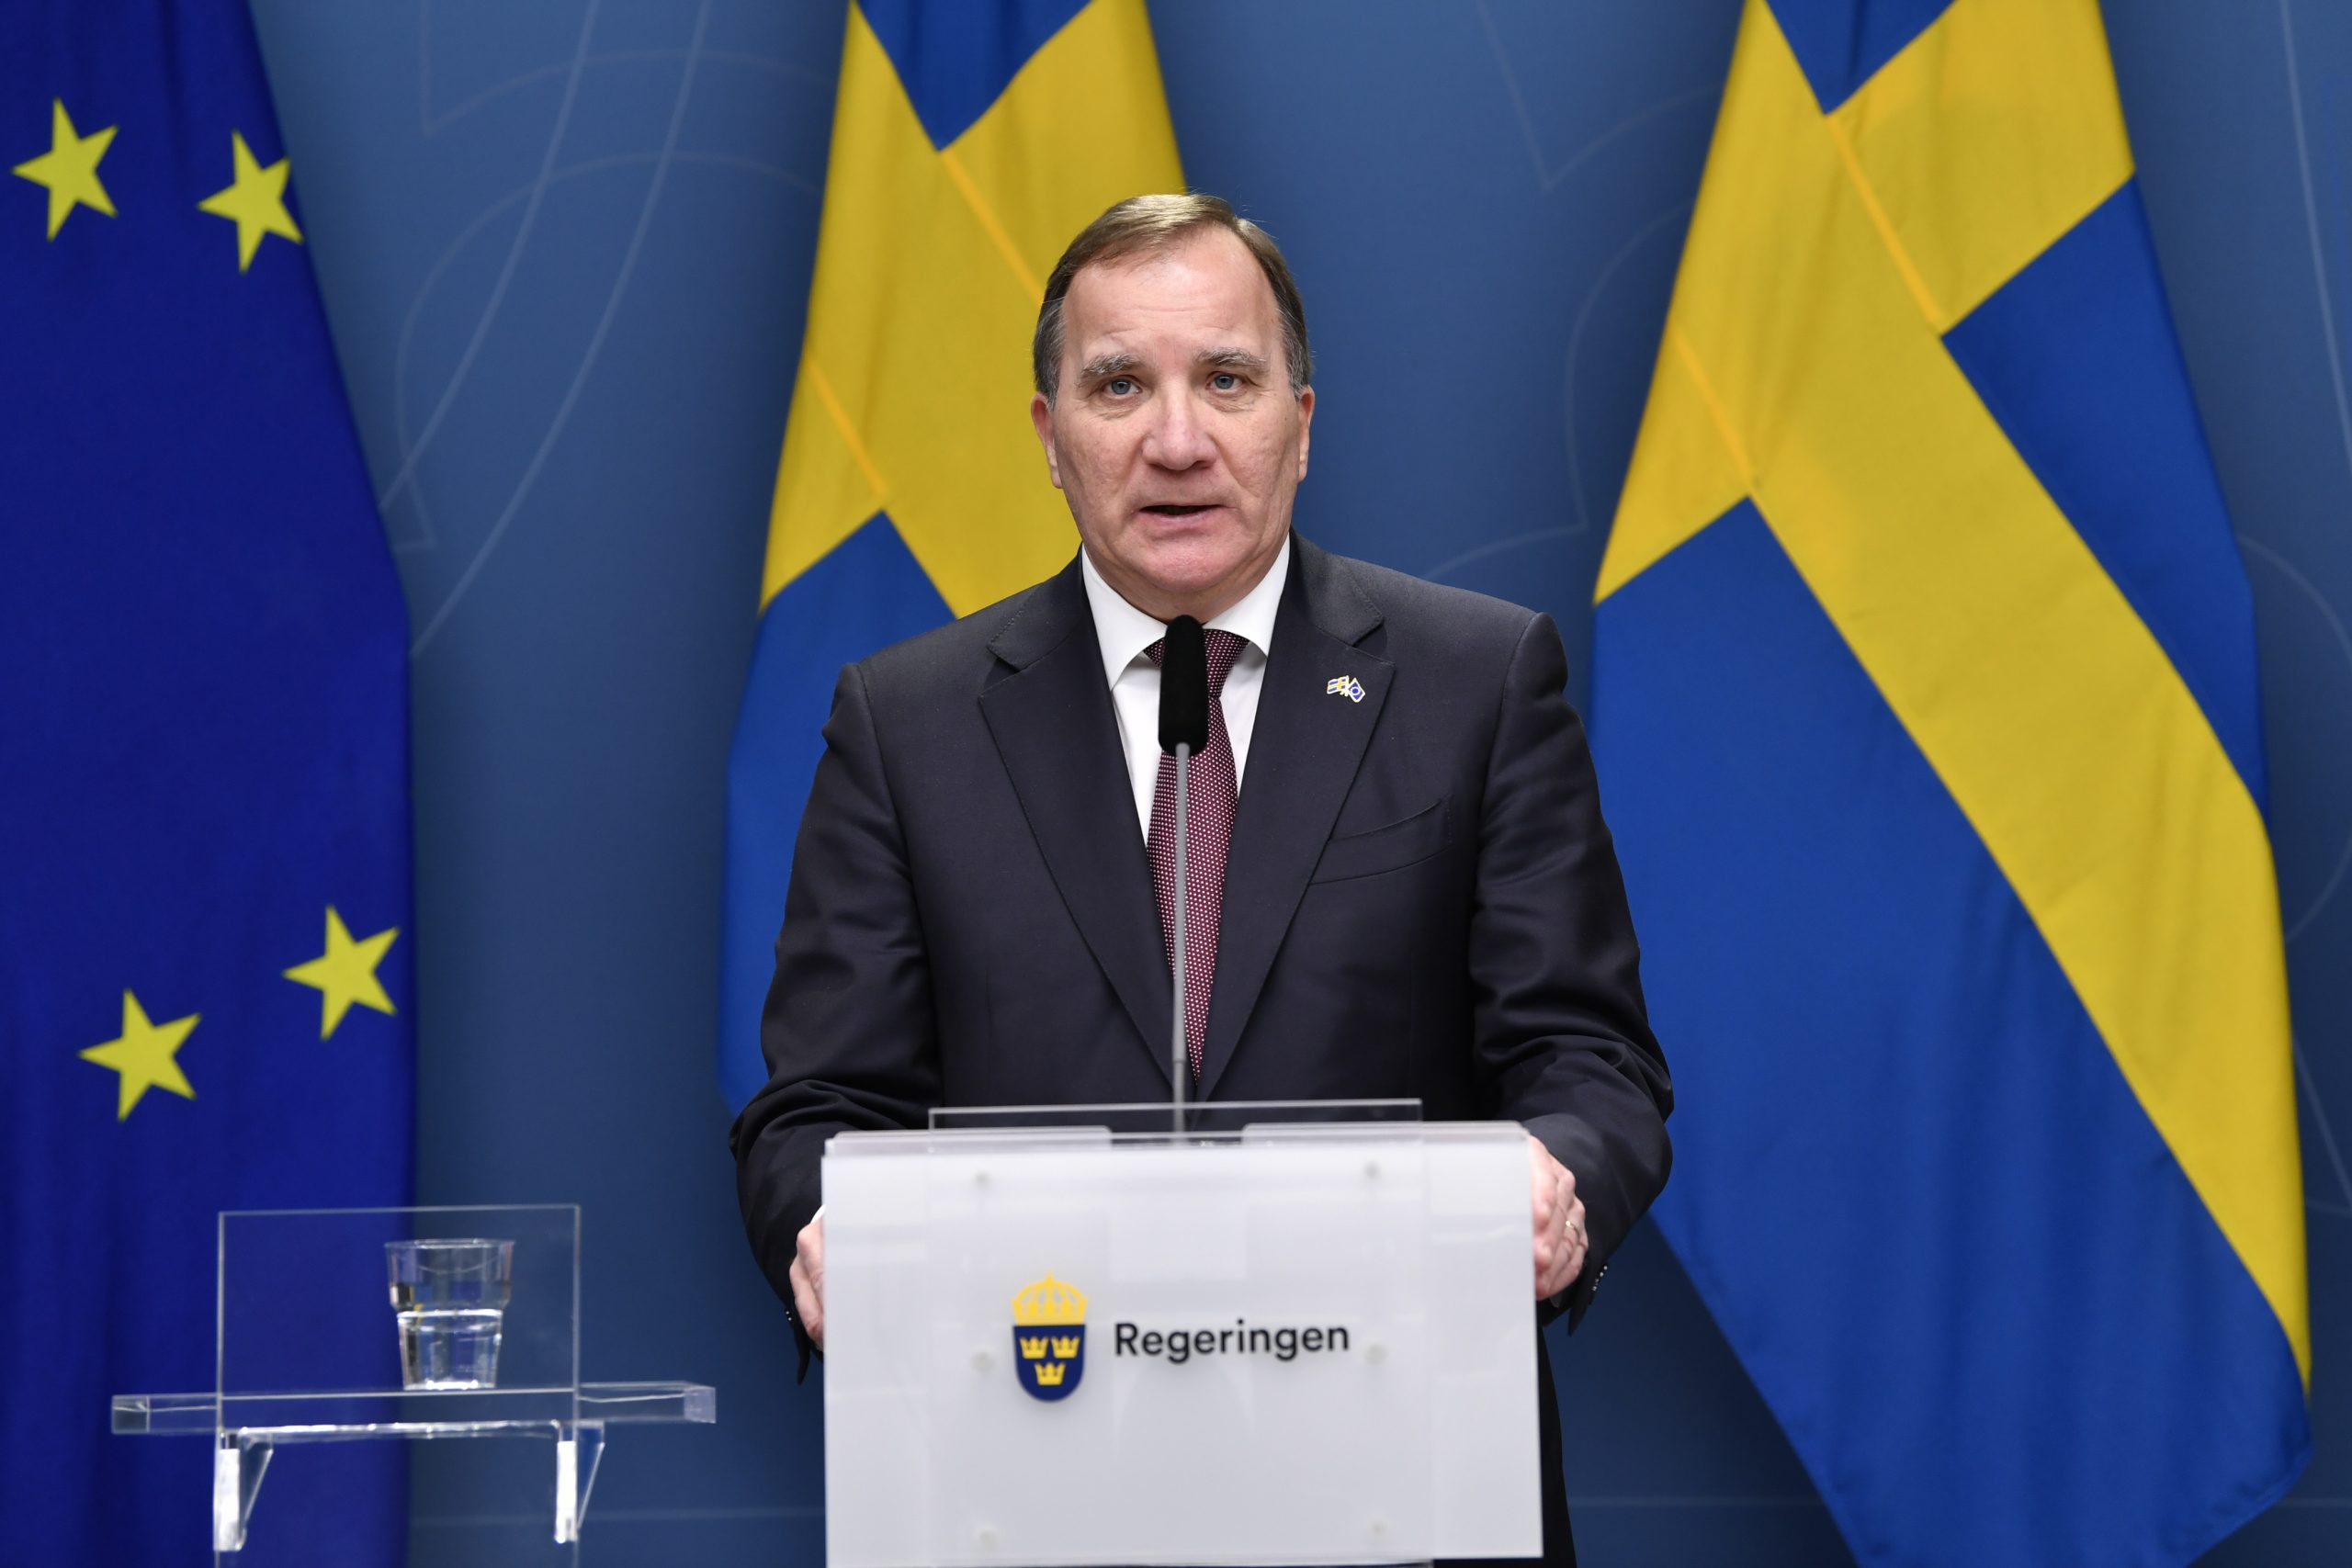 epa08870383 Sweden's Prime Minister Stefan Lofven talks about the advice before Christmas and the New Year holidays during a press conference in Stockholm, Sweden, 08 December 2020. According to reports, public gatherings and private meetings over Christmas and New Year will be limited to eight people.  EPA/HENRIK MONTGOMERY SWEDEN OUT